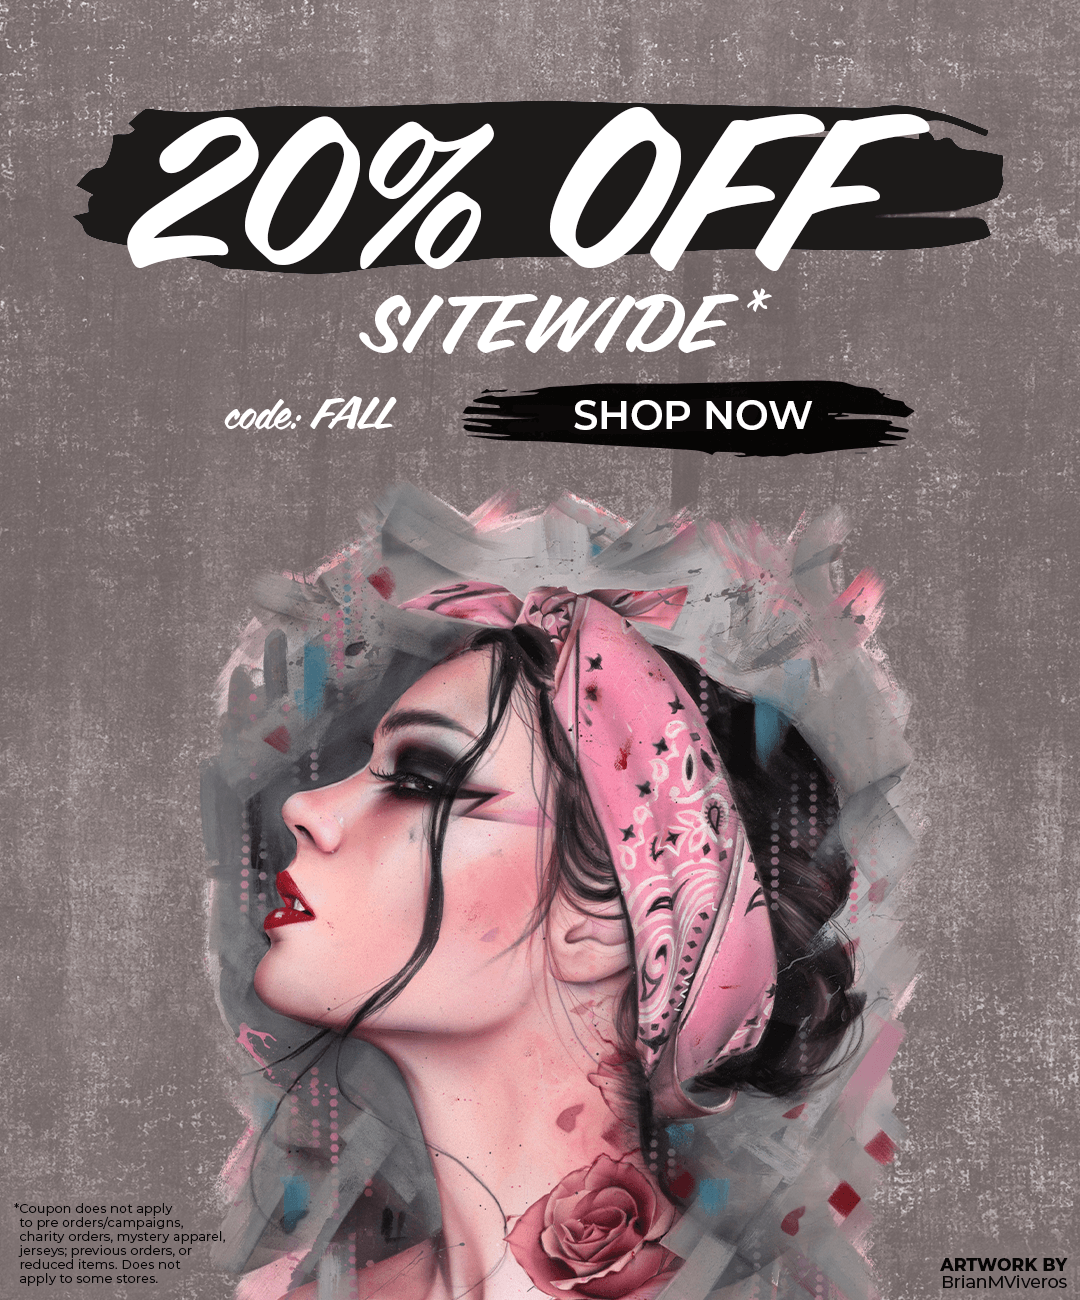 Shop 20% Off Flash Sale. Code: FALL. Shop Now. Artwork by BrianMViveros.